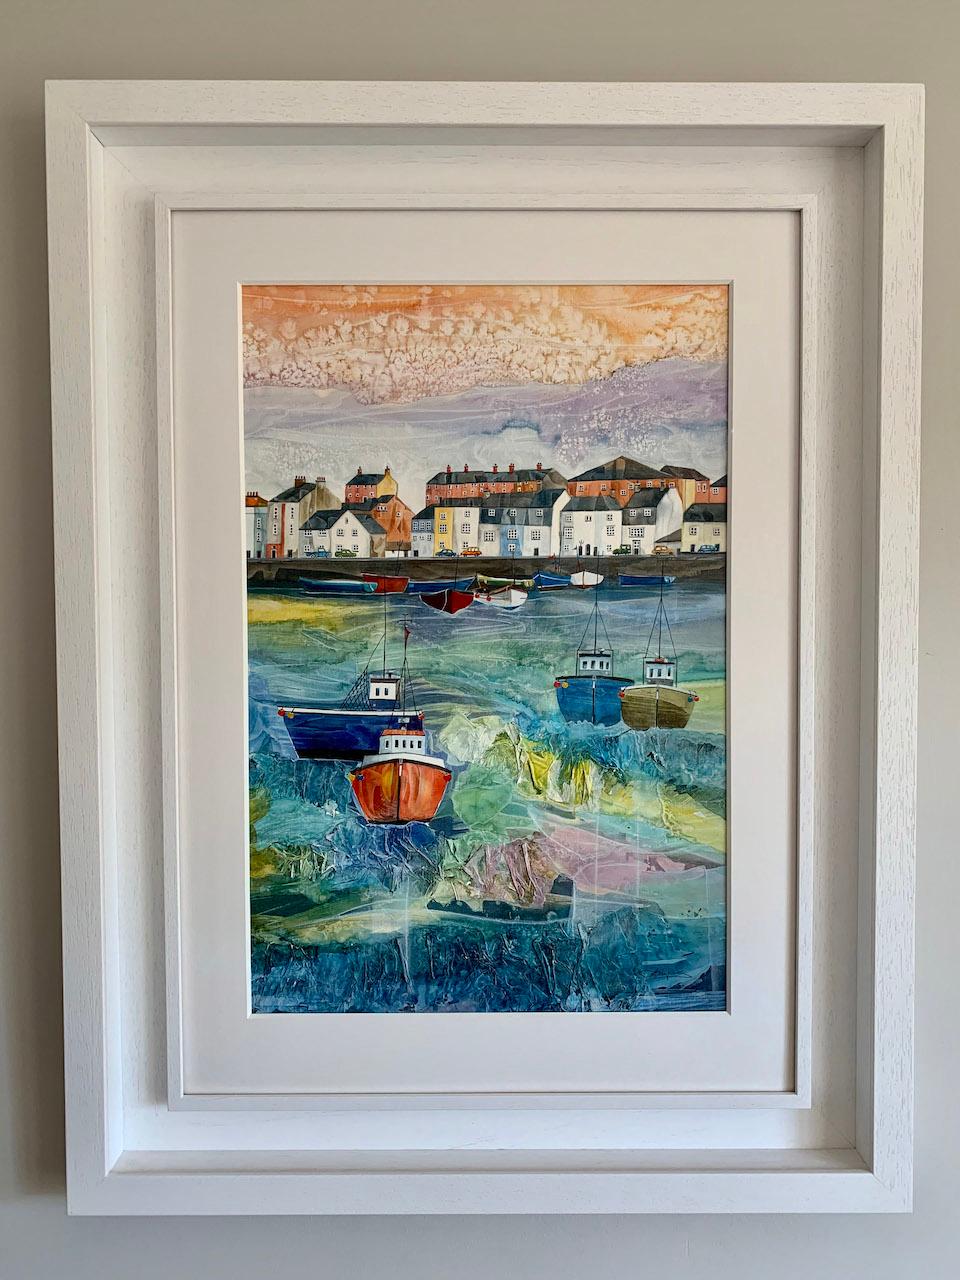 Weymouth Harbour, Dorset.
Original harbour painting.
Mixed Media on board (Gesso, acrylic and acrylic inks).
Image Size. 51cm x 38cm.
Framed size. 75cm x 57cm x 4cm.
Sold framed – Beautifully framed in a triple white wooden moulding with